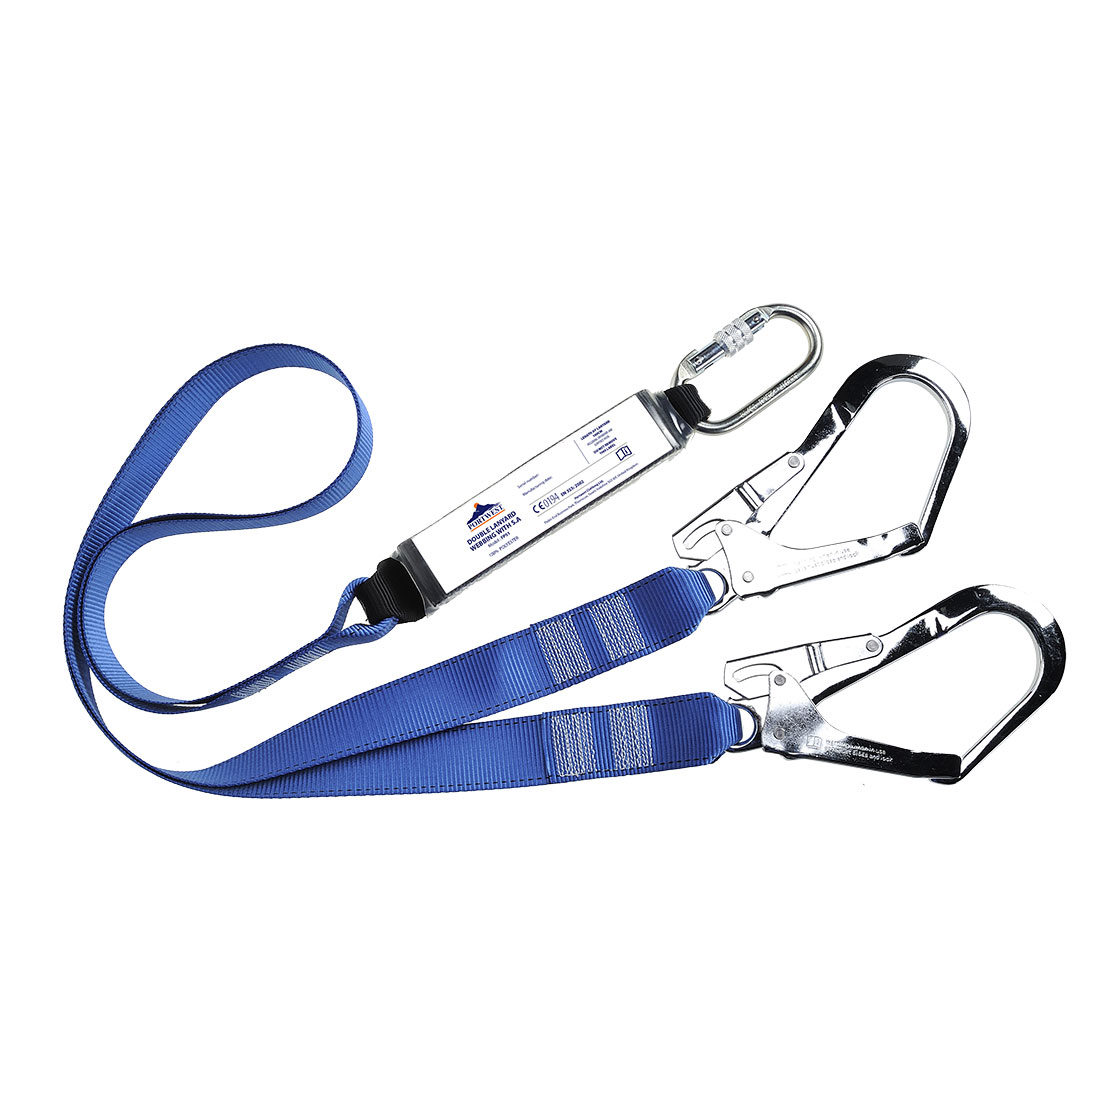 Double Webbing Lanyard With Shock Absorber - 1.8m